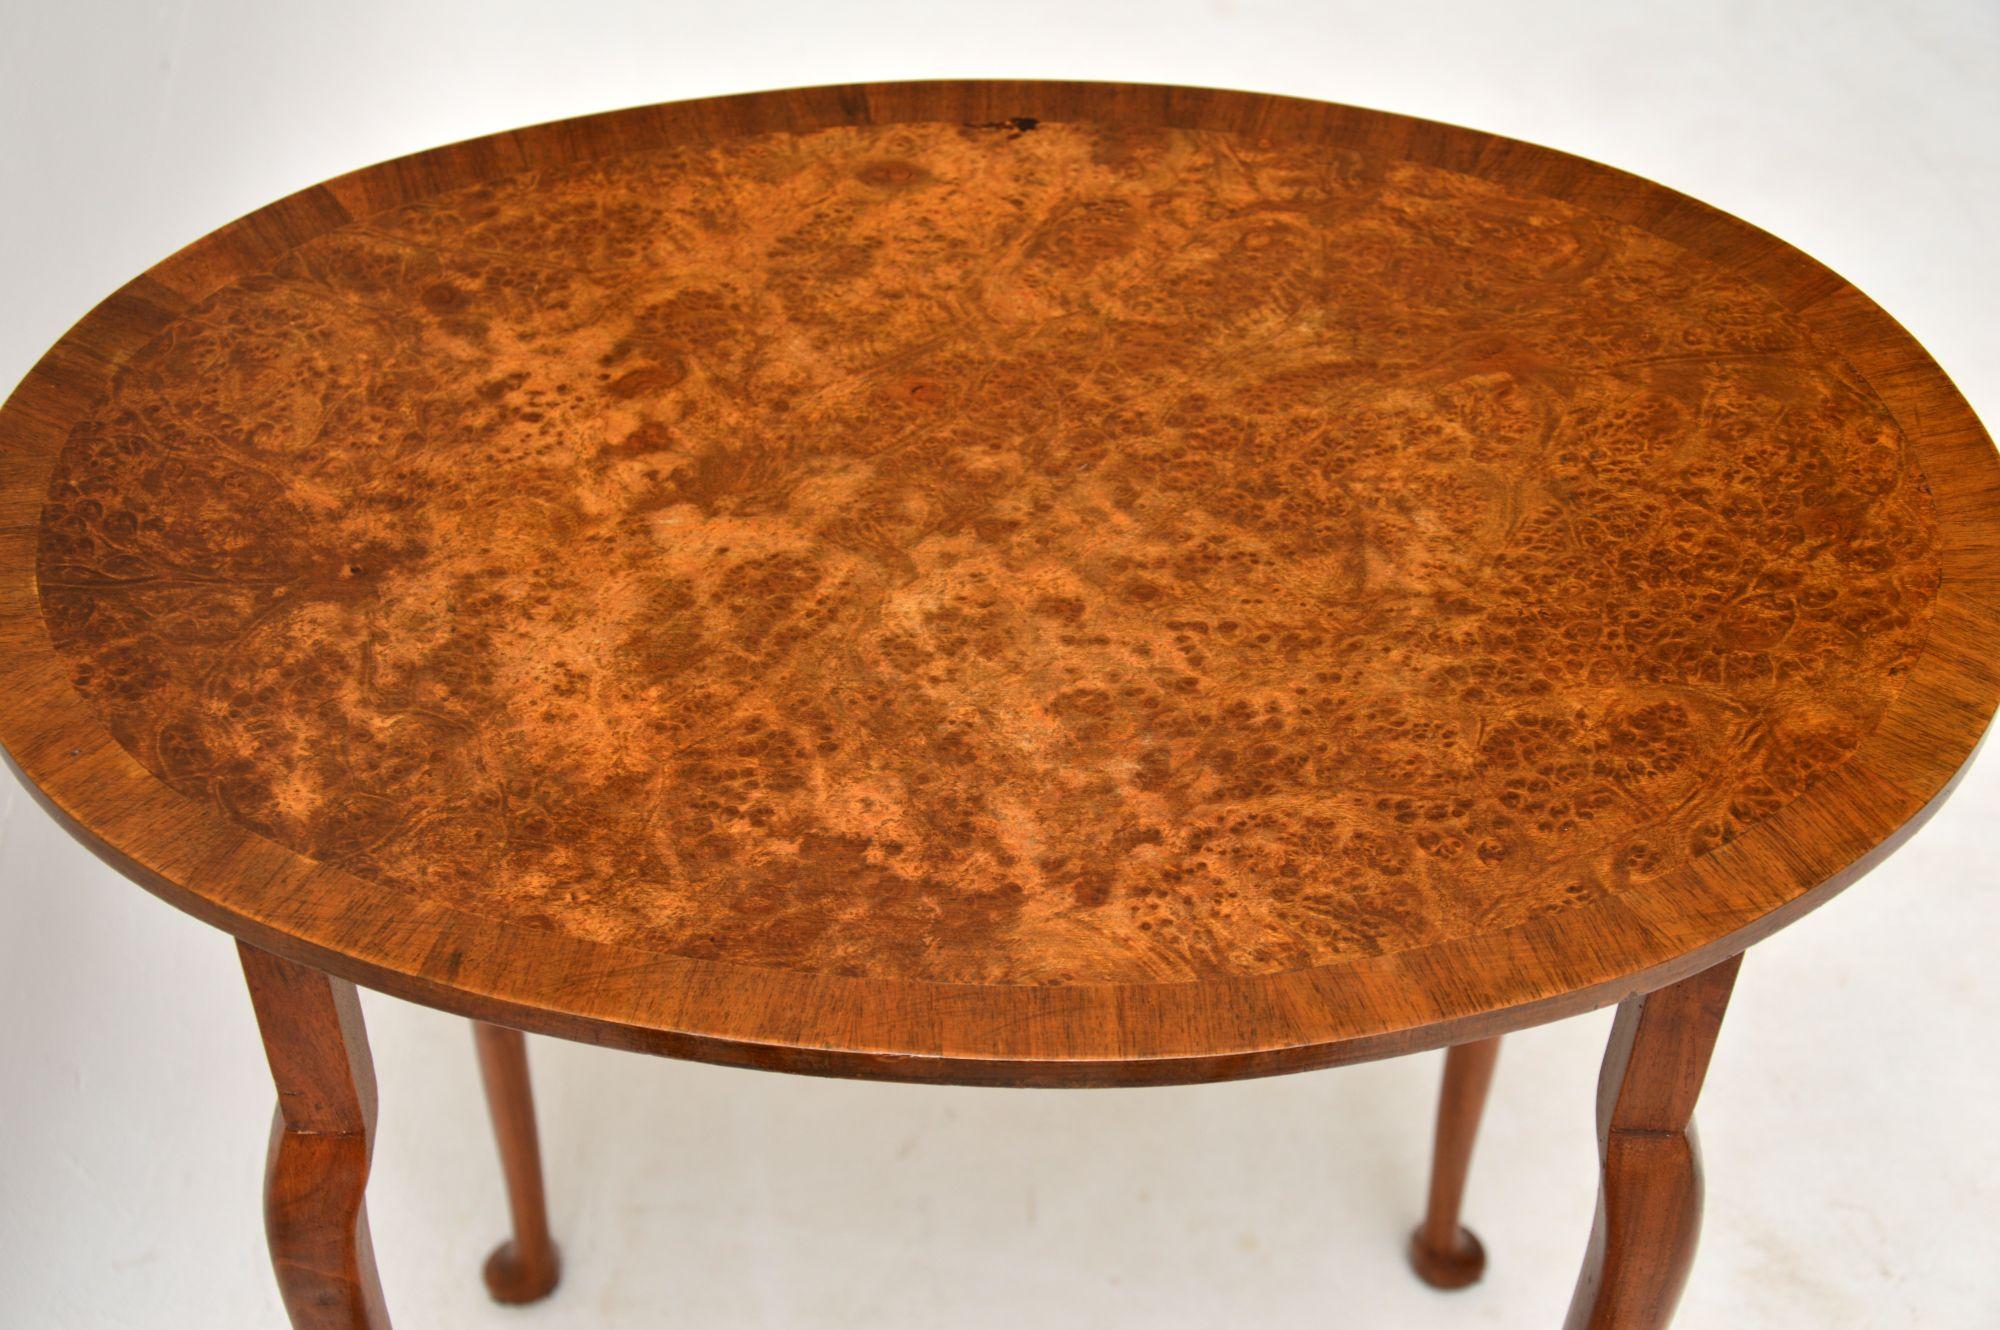 English Antique Burr Walnut Oval Nest of Tables